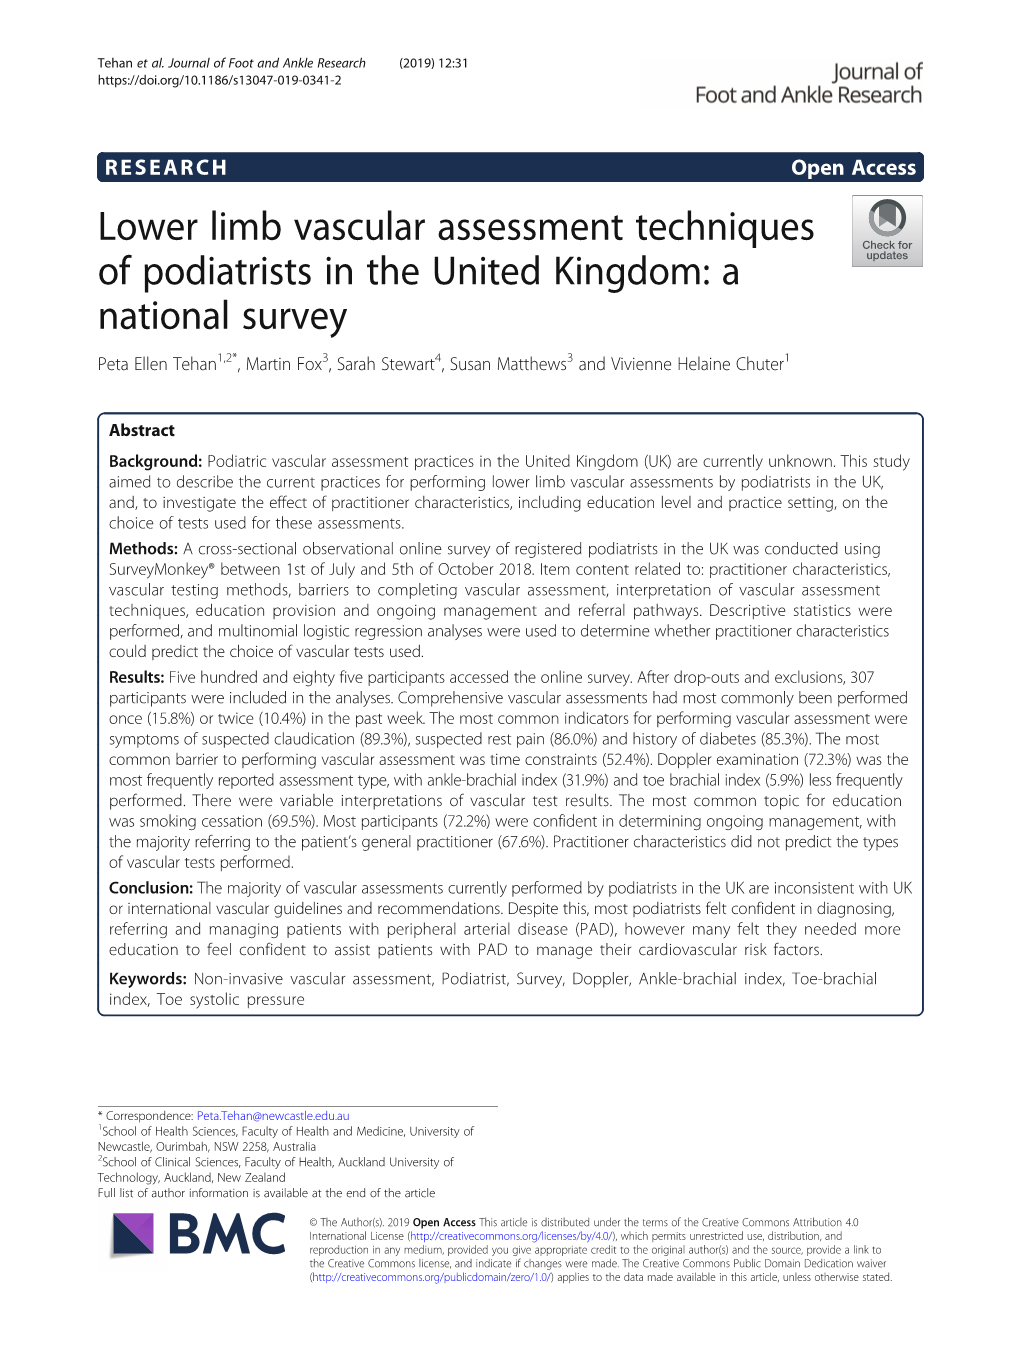 Lower Limb Vascular Assessment Techniques of Podiatrists in The